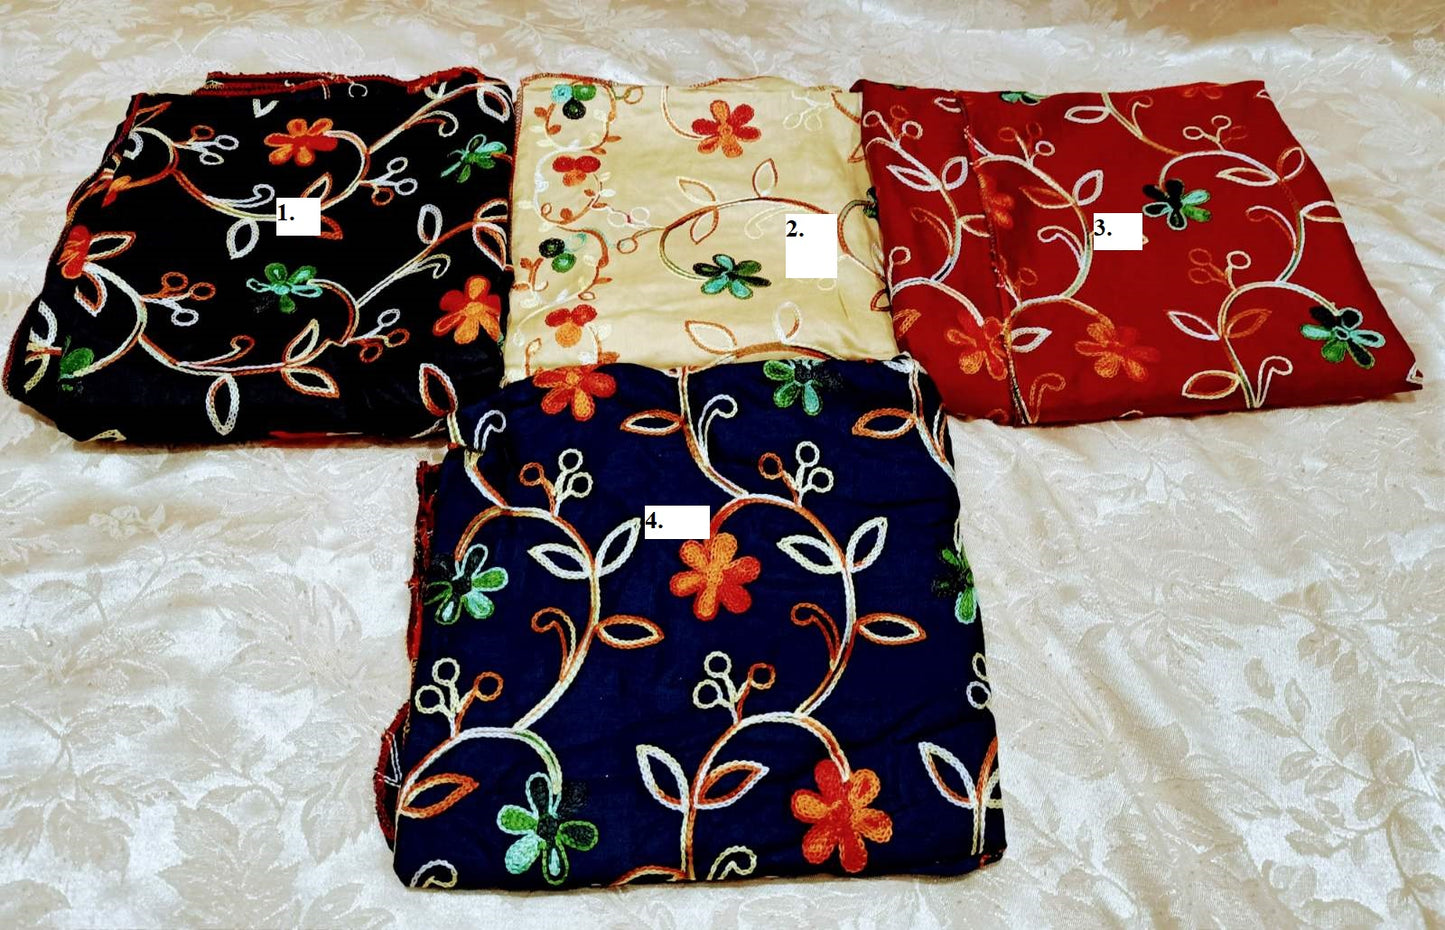 Full Embroidery Hijabs